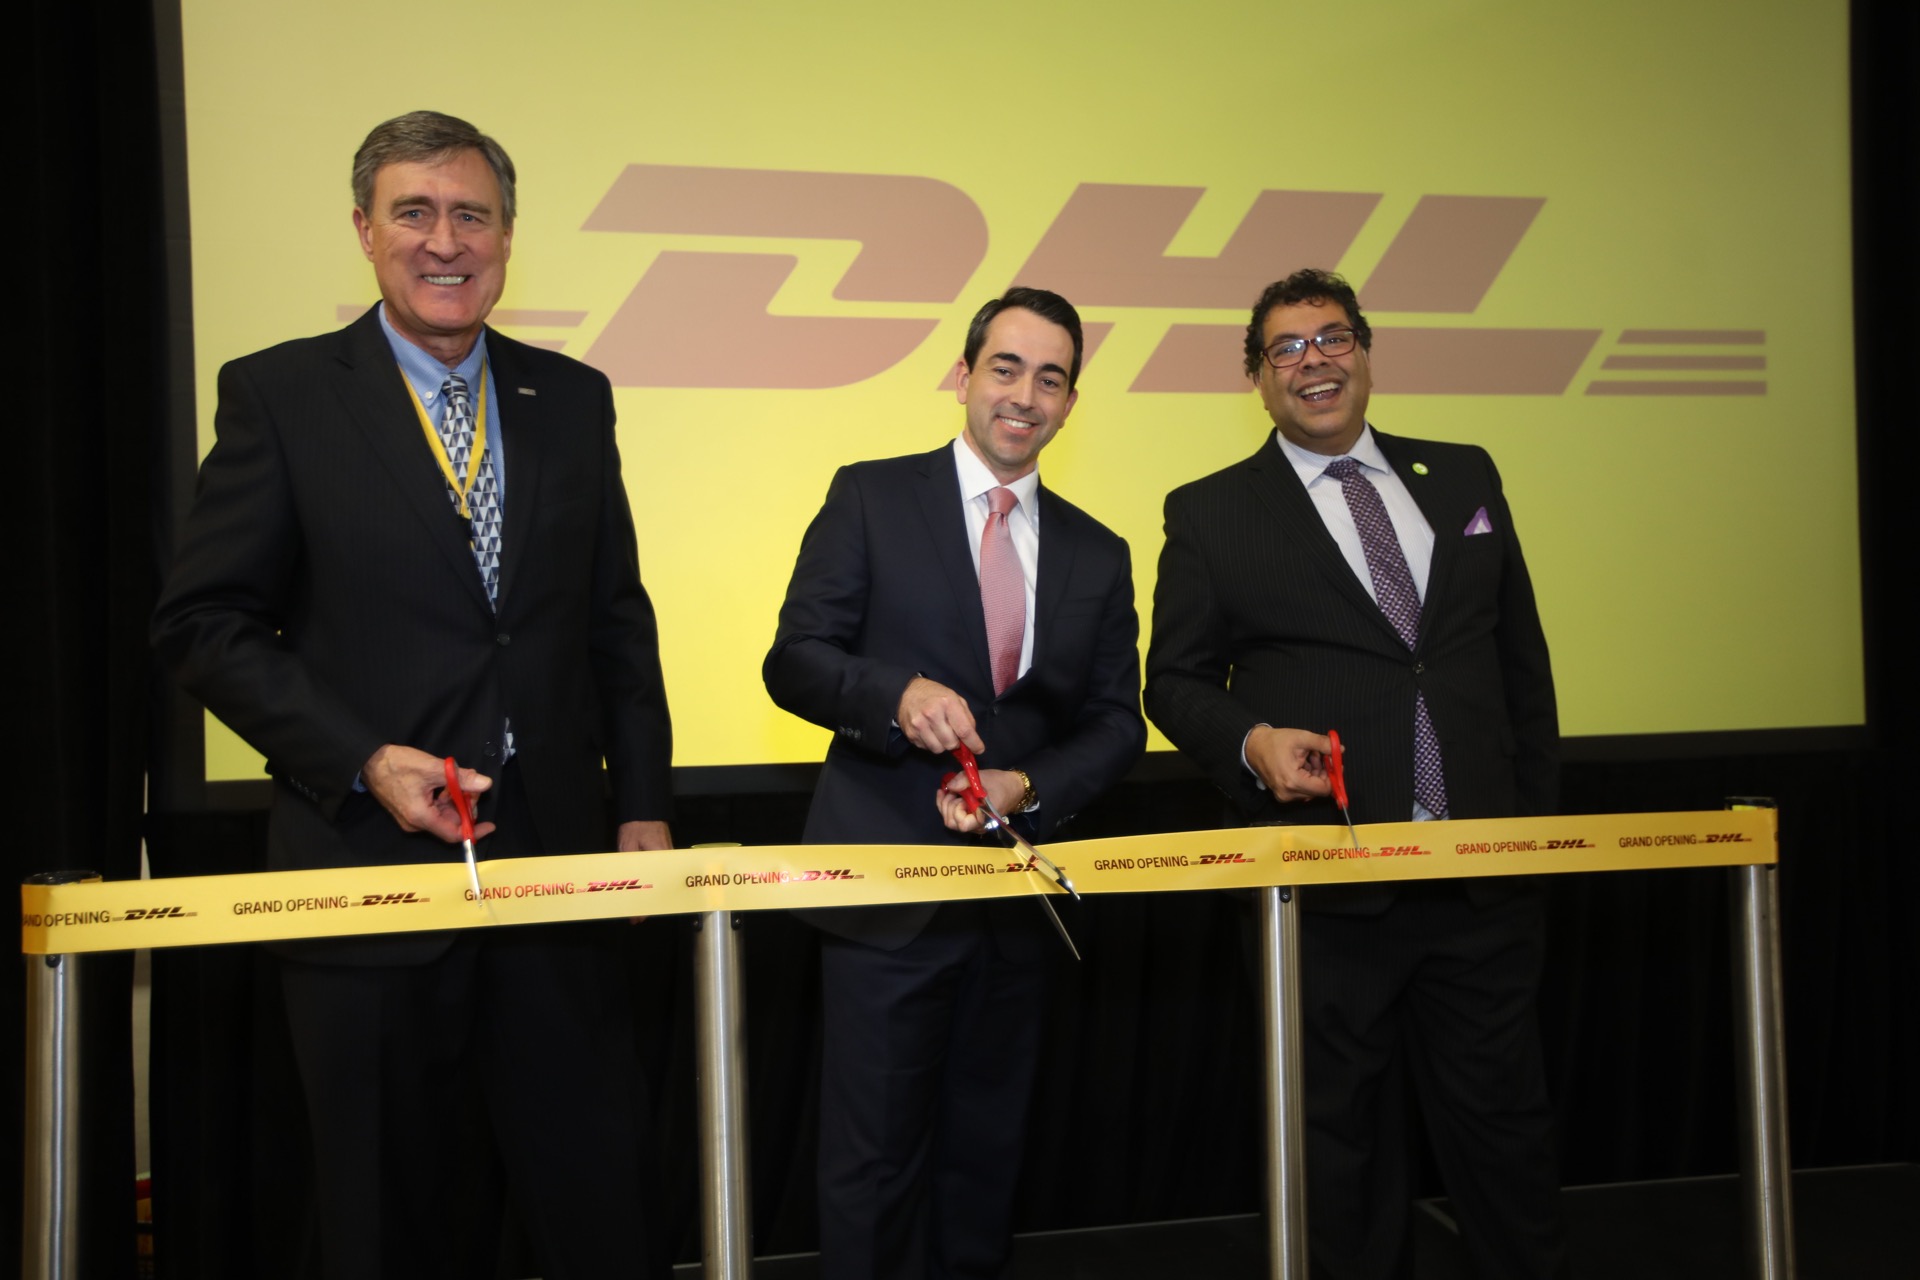 Pictured: Mel Belich, Calgary Airport Authority Board Chair (L) and His Worship Calgary Mayor Naheed Nenshi (R) join Andrew Williams, CEO of DHL Express Canada, in officially opening DHL’s expanded cargo facilities at YYC Calgary International Airport.